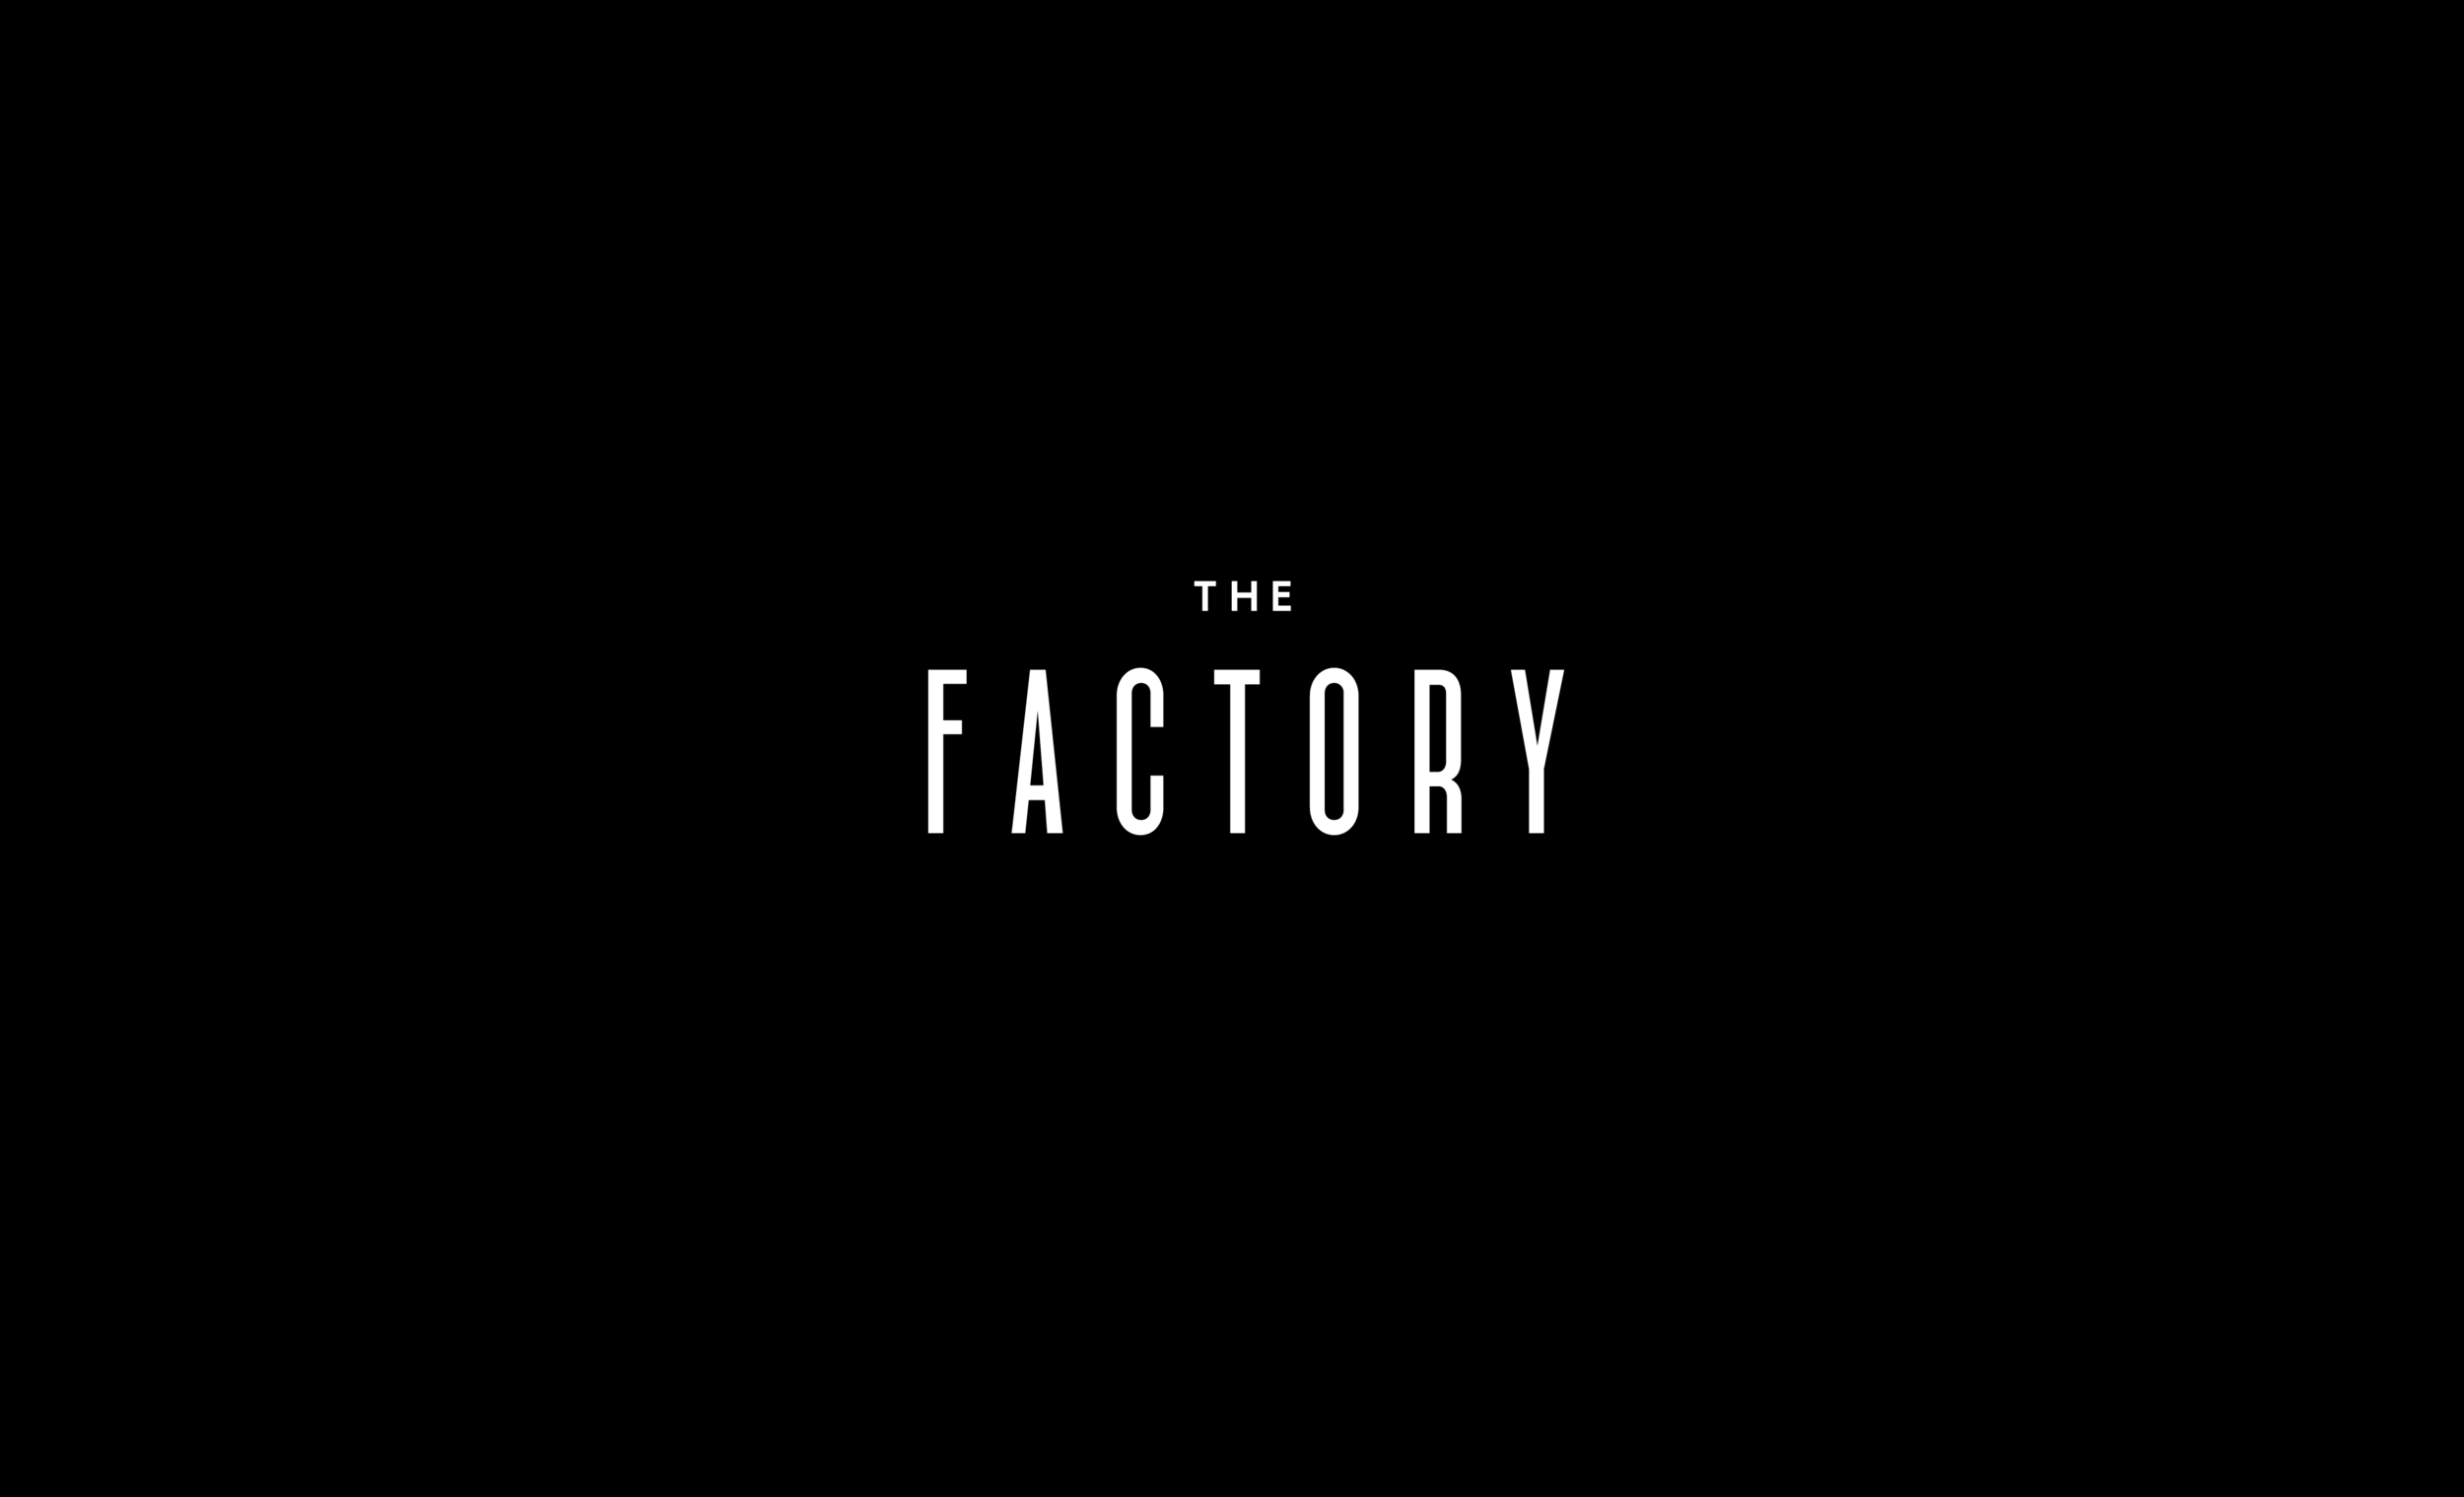 thefactory-design1@2x.png